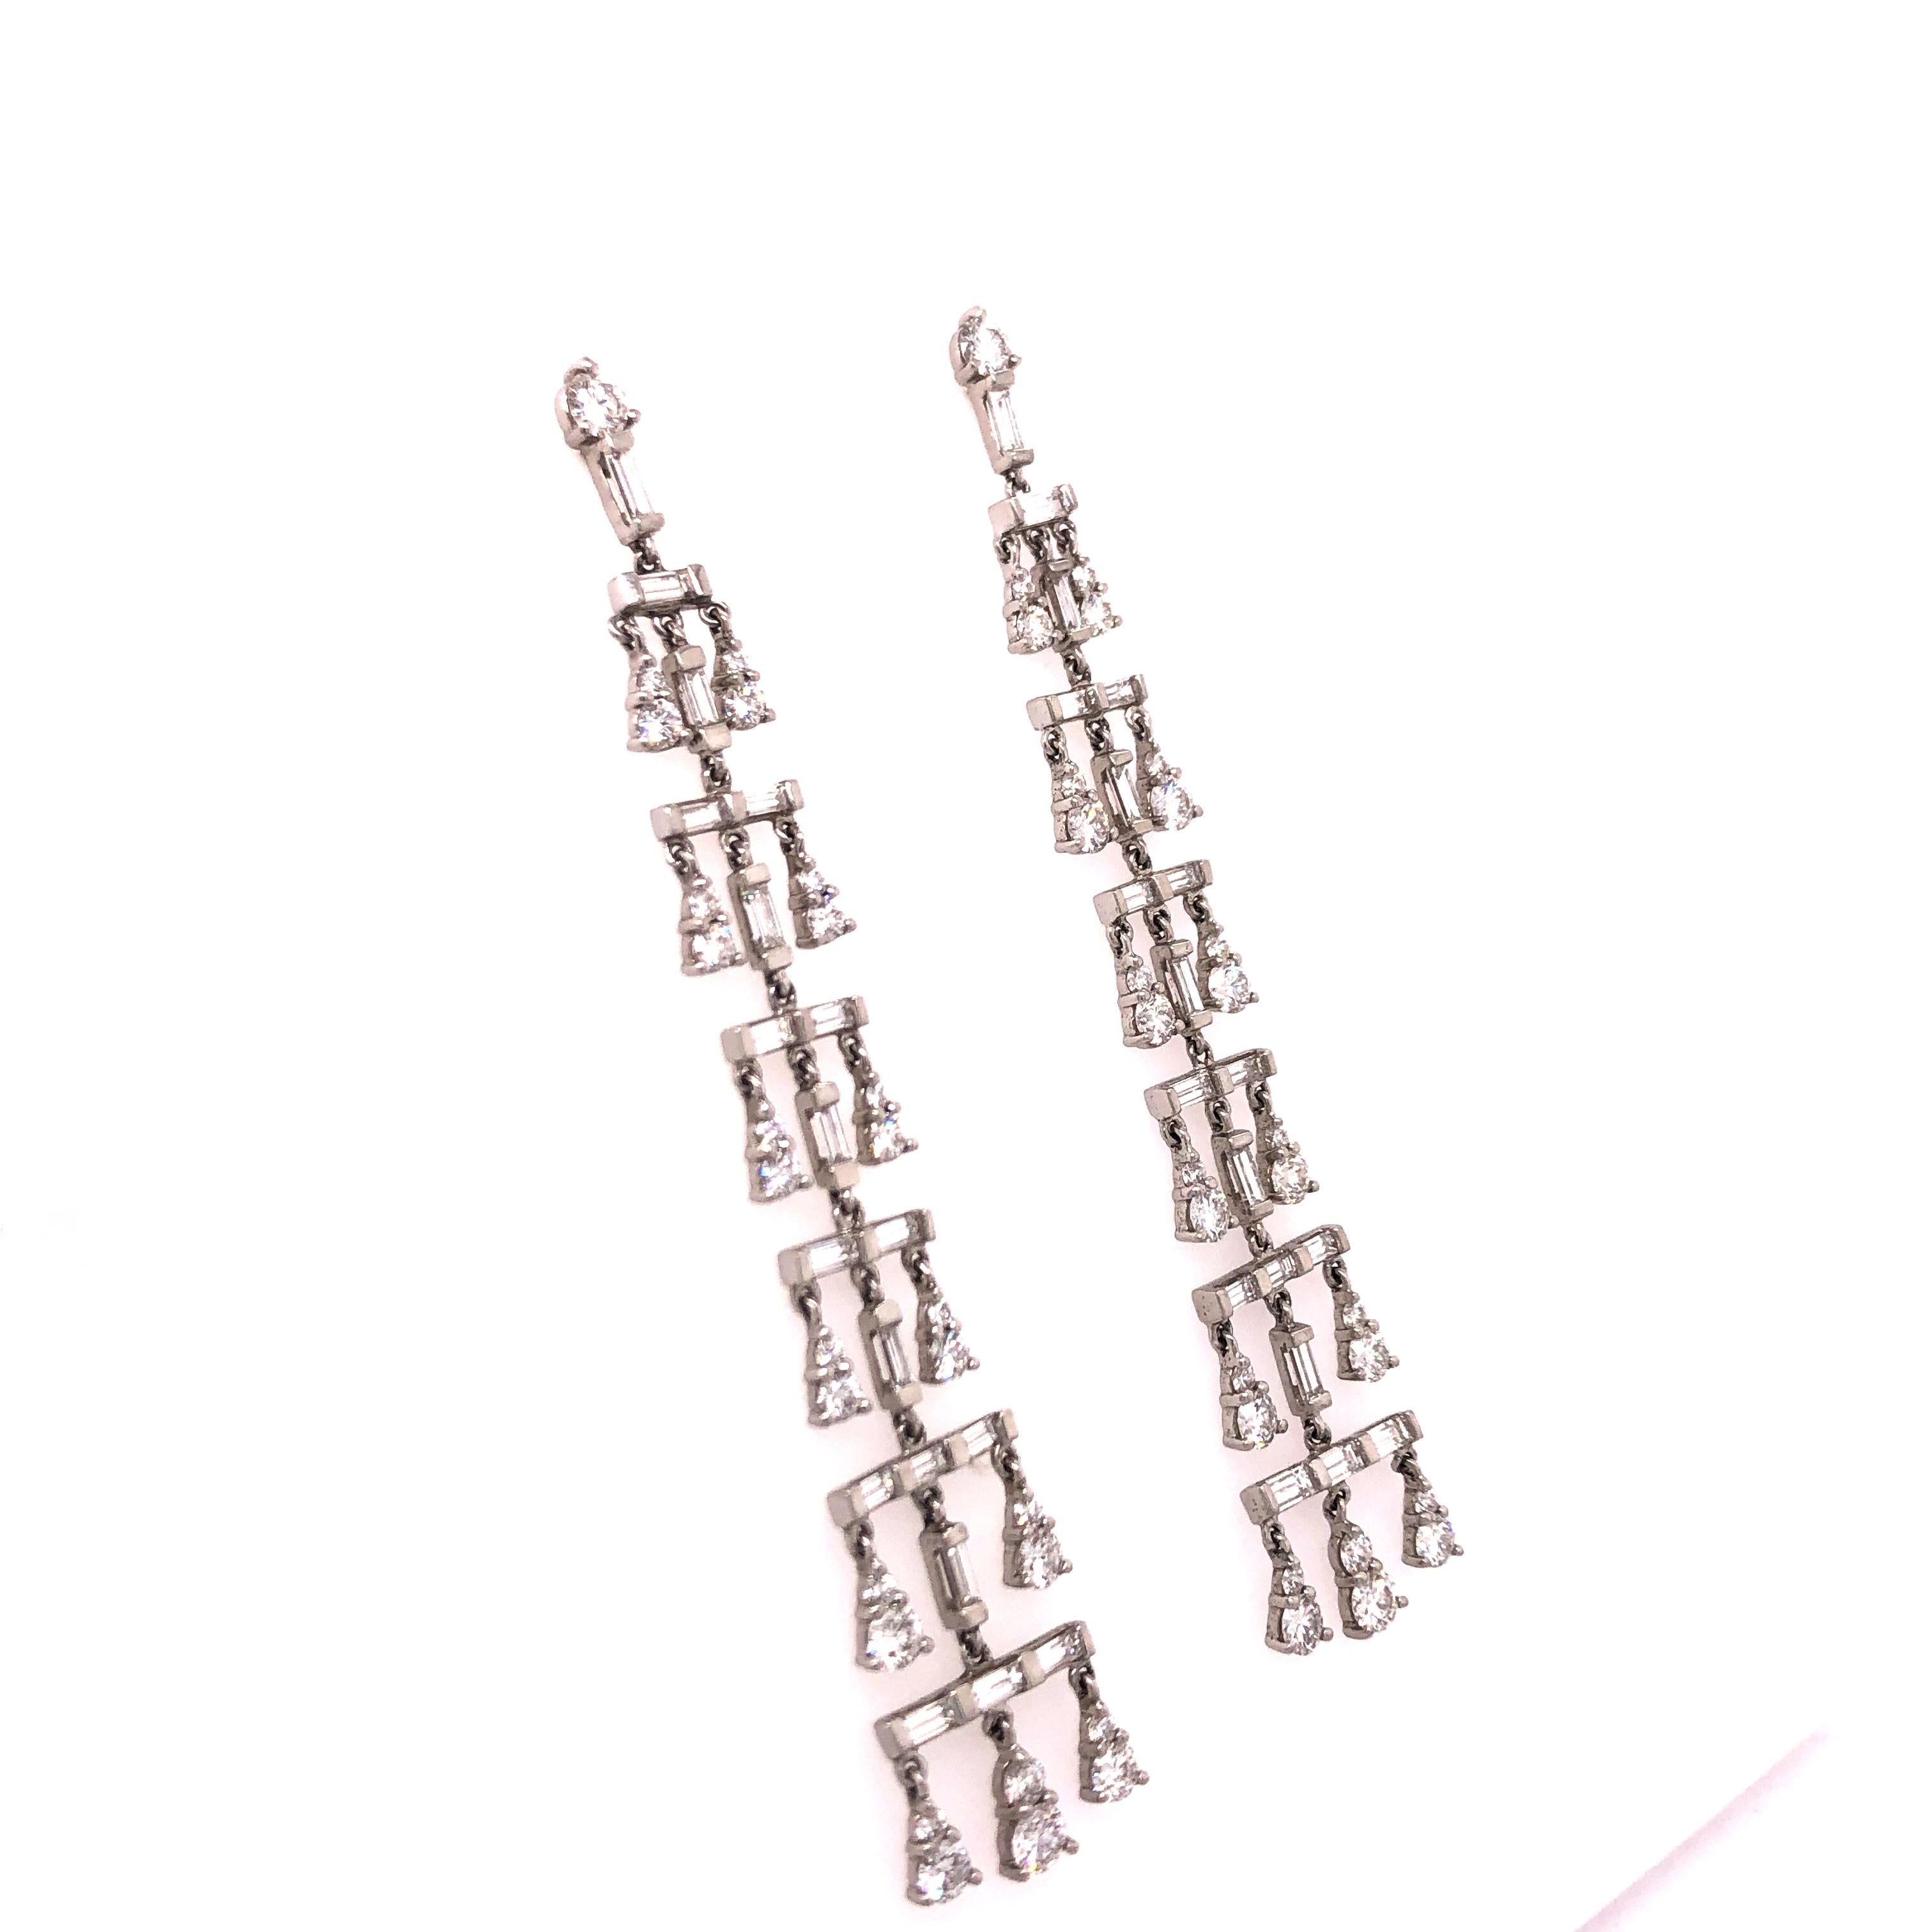 Vera Wang is famous for her gorgeous couture designs and that same beauty is seen in these Platinum Diamond Chandelier Earrings. A pattern of baguette and round diamonds give the appearance of drops of water that taper down as if from a fountain.